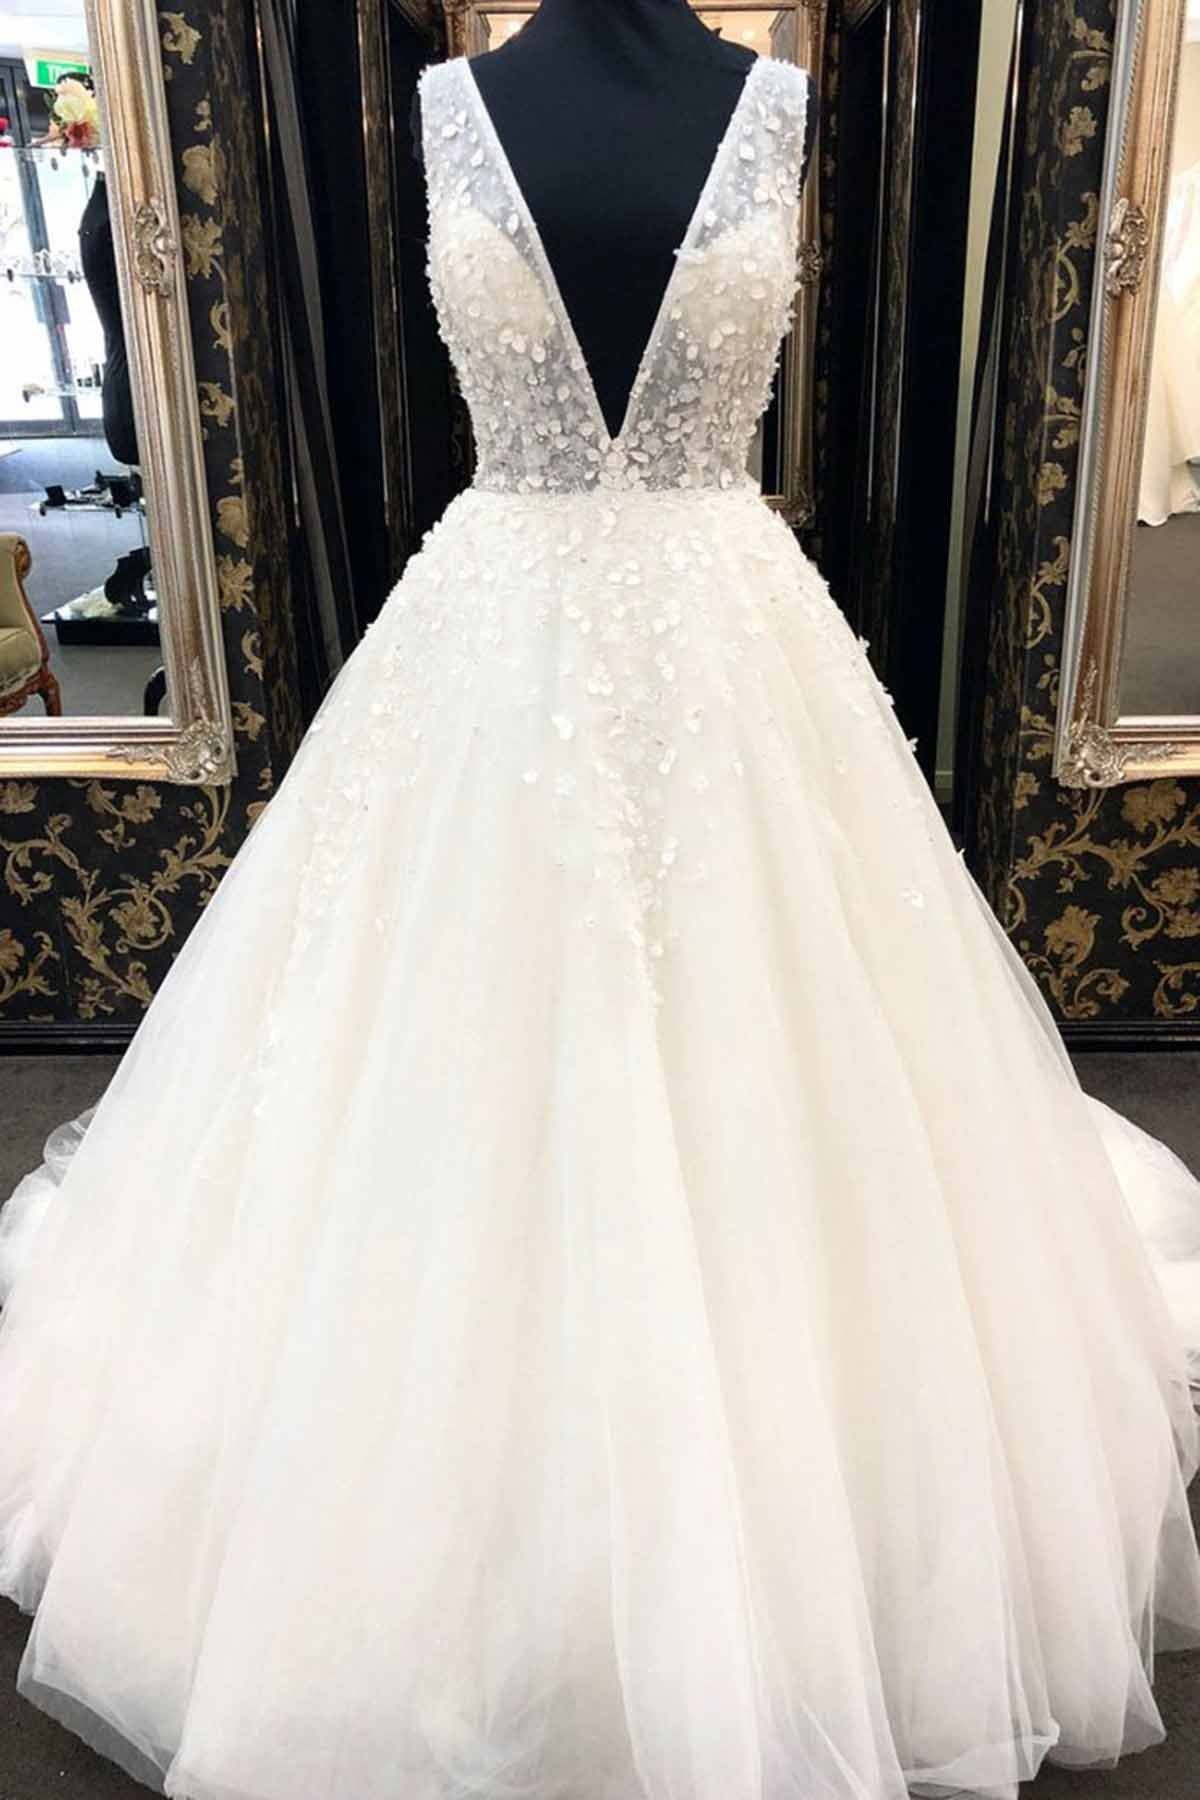 Load image into Gallery viewer, AffordableWhite Tulle V-Neck Long Wedding Dress A-Line Applqiues Bridal Gowns On Sale-27dress
